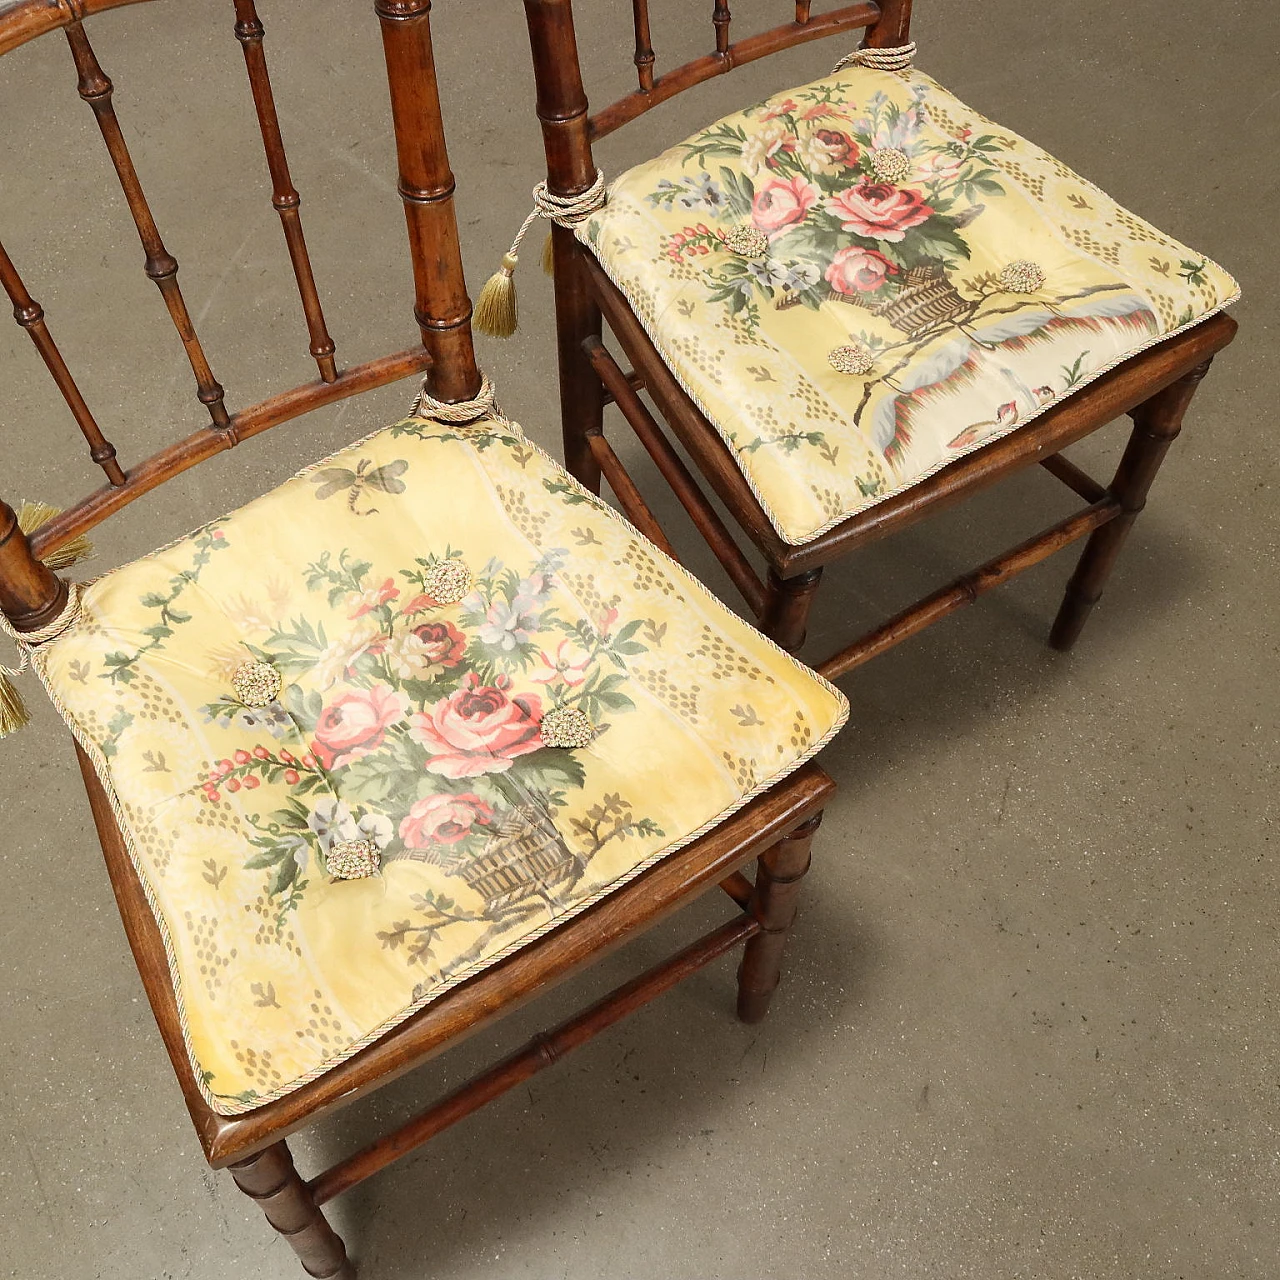 Pair of Chiavarine chairs in maple & cane seat, 19th century 6